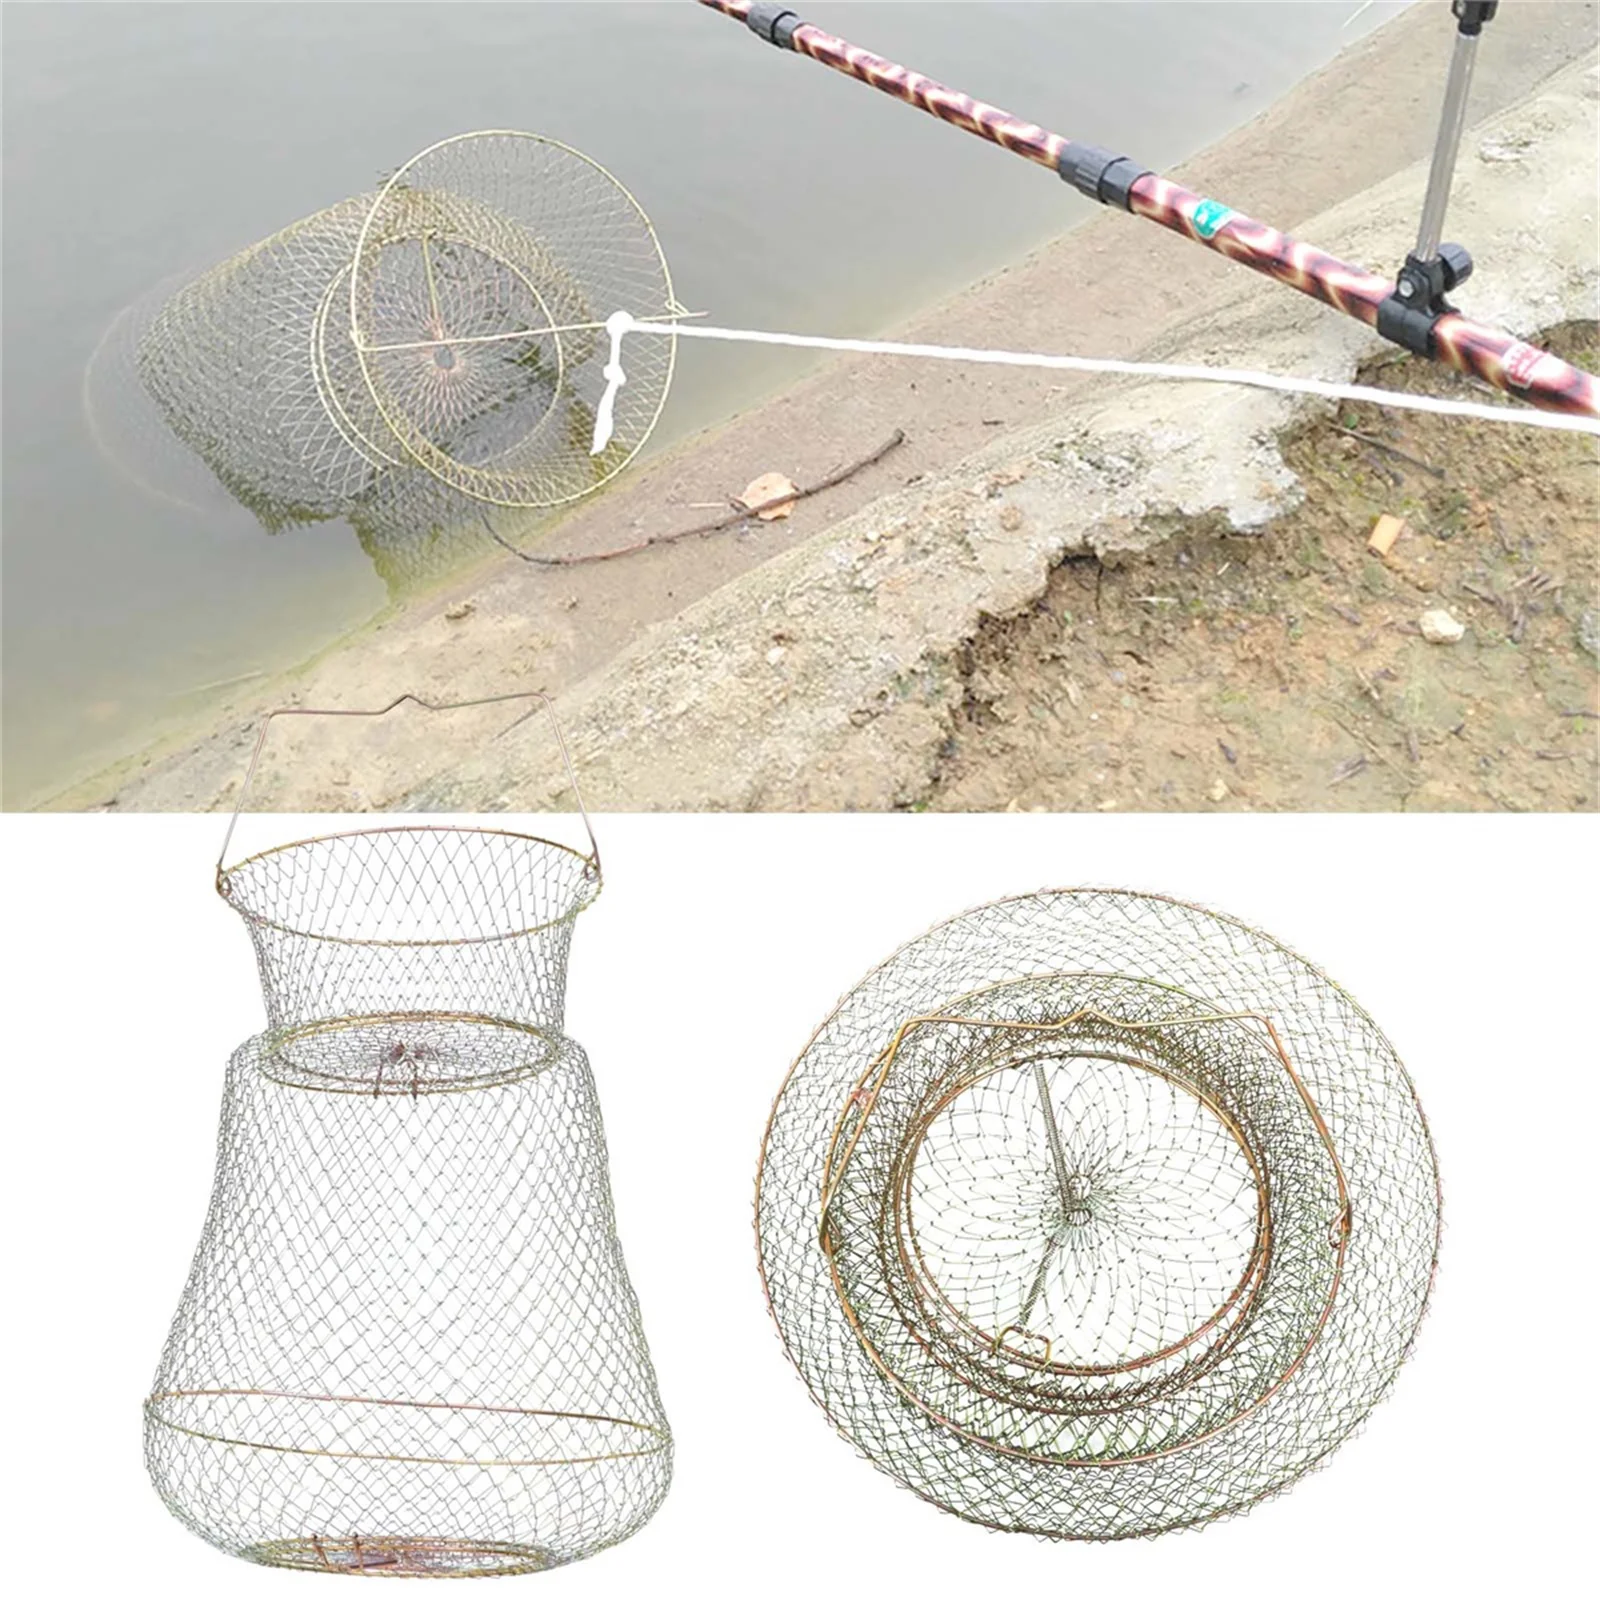 Crab Pot Fishing Accessory Iron Cage Trap Bling Accessories Net Outdoor Container Tools Basket Bag enlarge